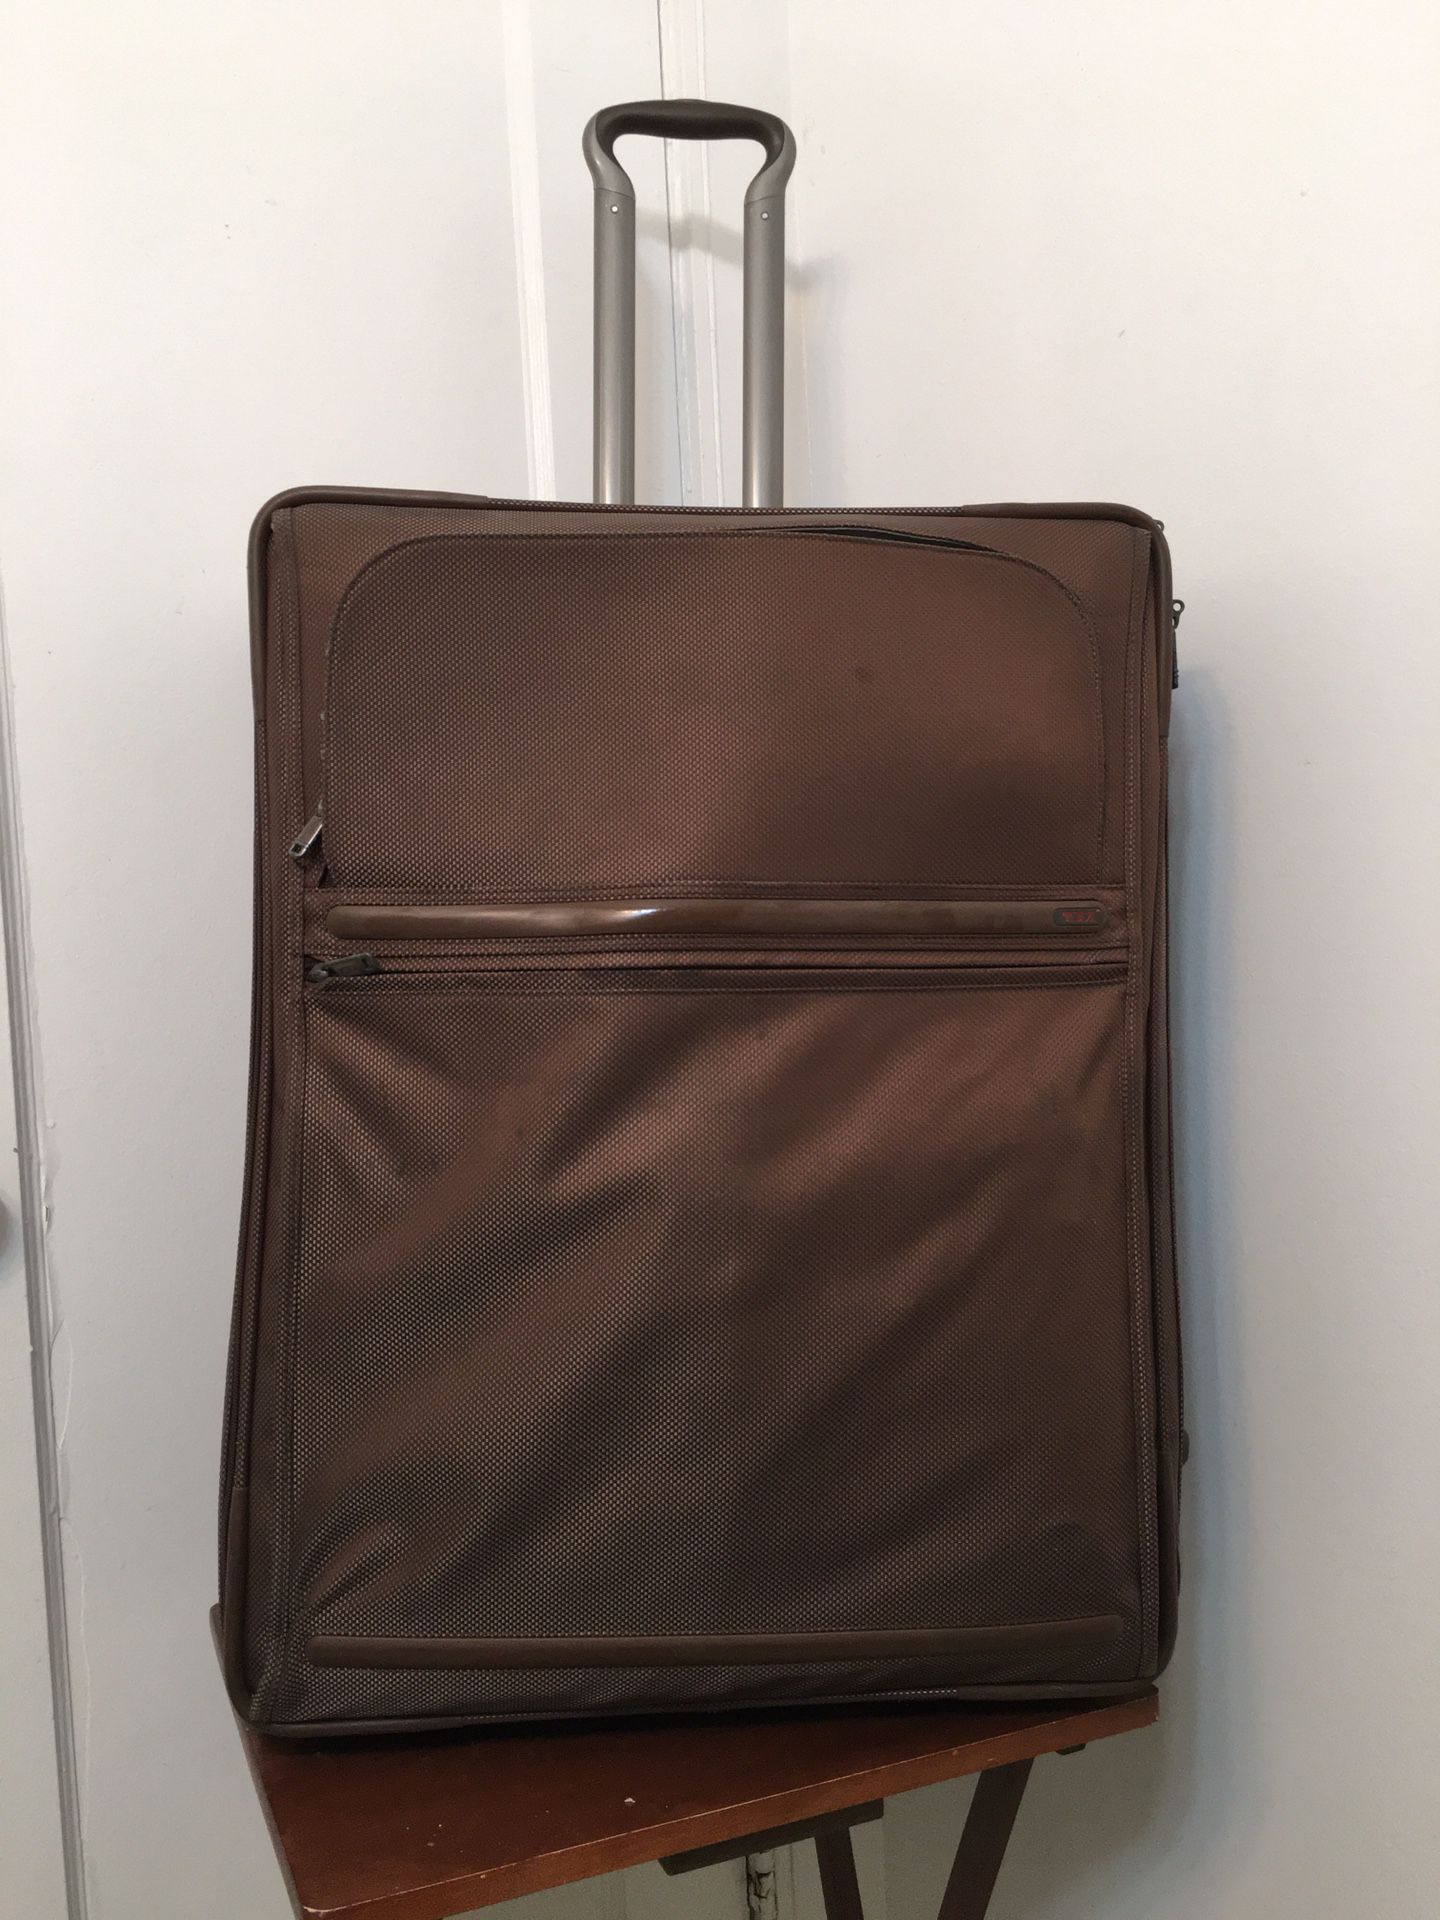 Tumi Travel Luggage  Bag with attachment of garment bag inside . Brown 26” Two Wheeled . Dimension 14x20x26.  Perfect and excellent condition and only